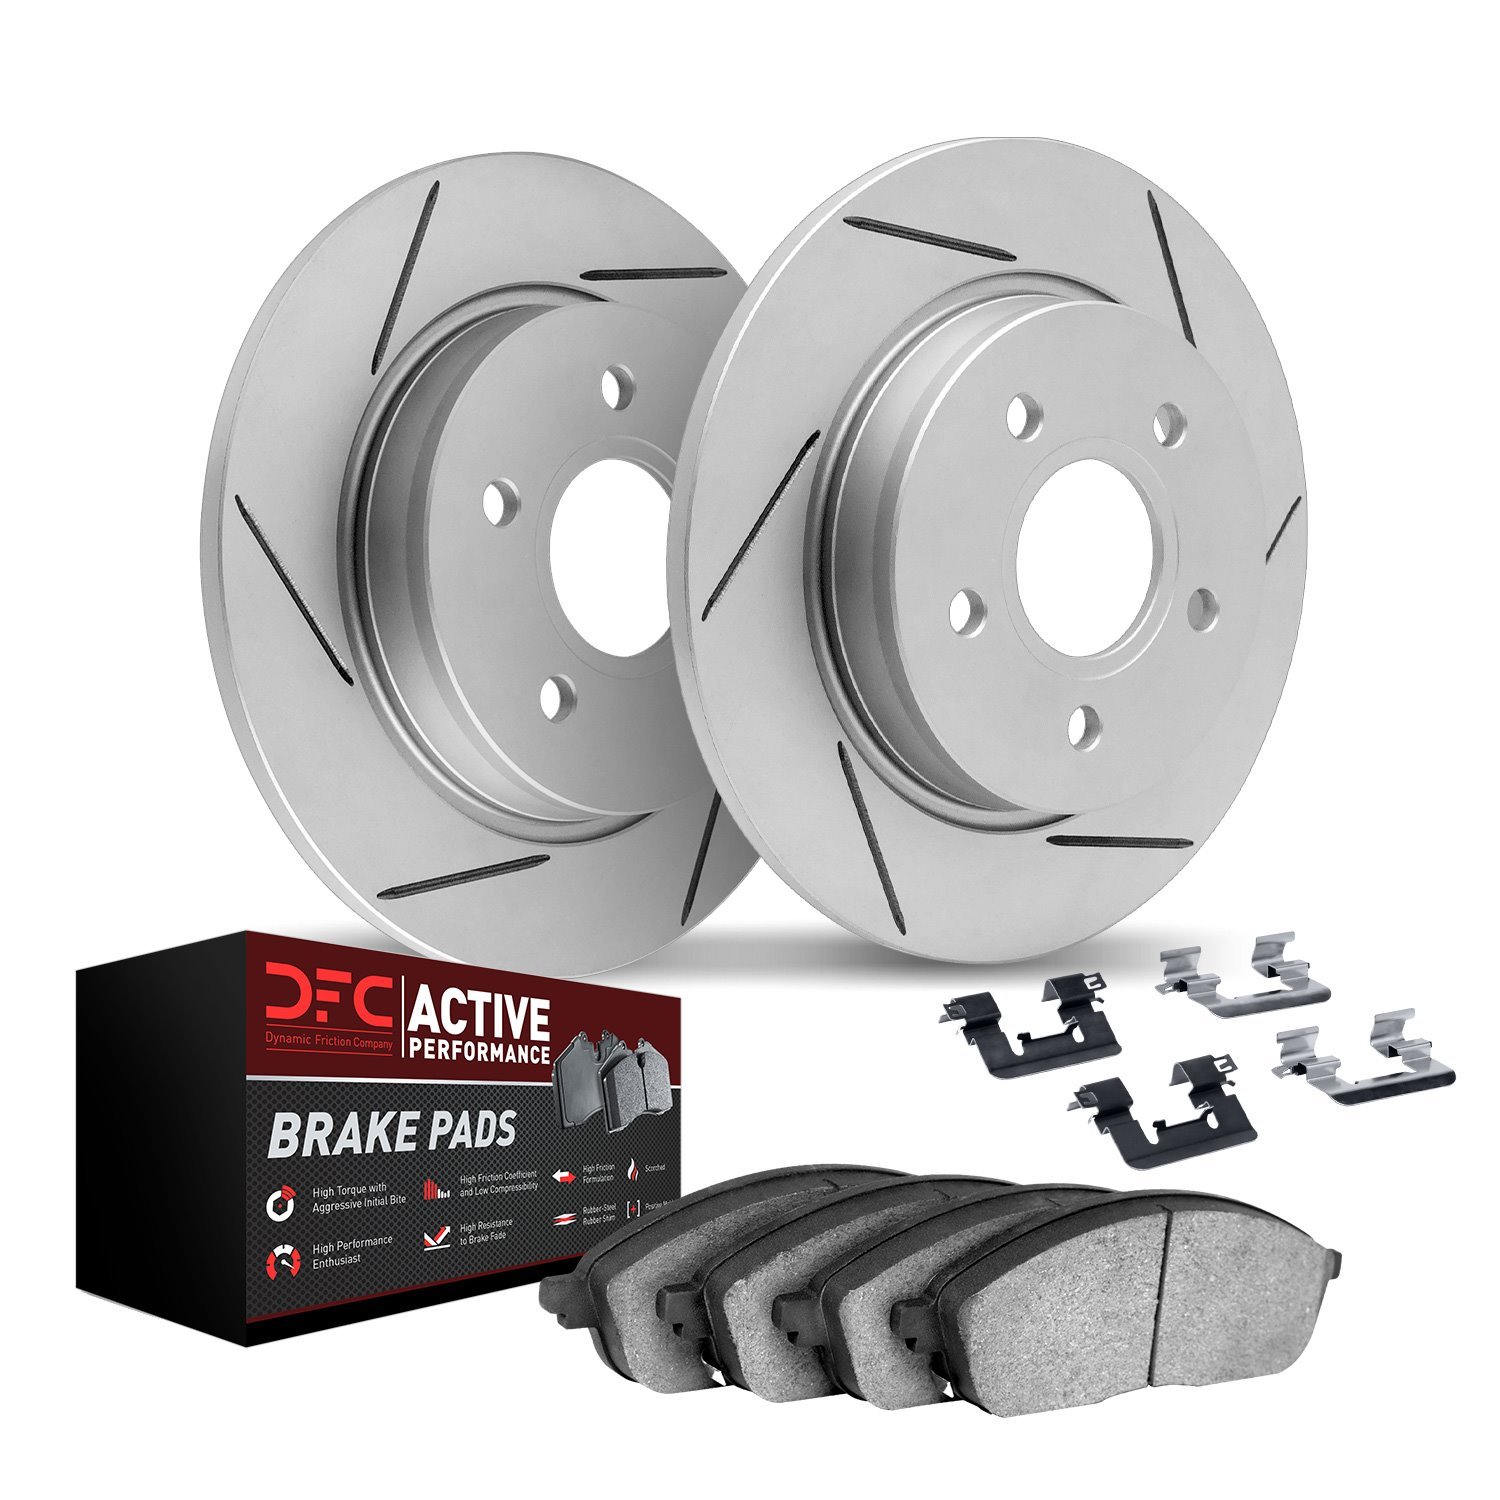 2712-59075 Geoperformance Slotted Brake Rotors with Active Performance Pads Kits & Hardware, Fits Select Acura/Honda, Position: